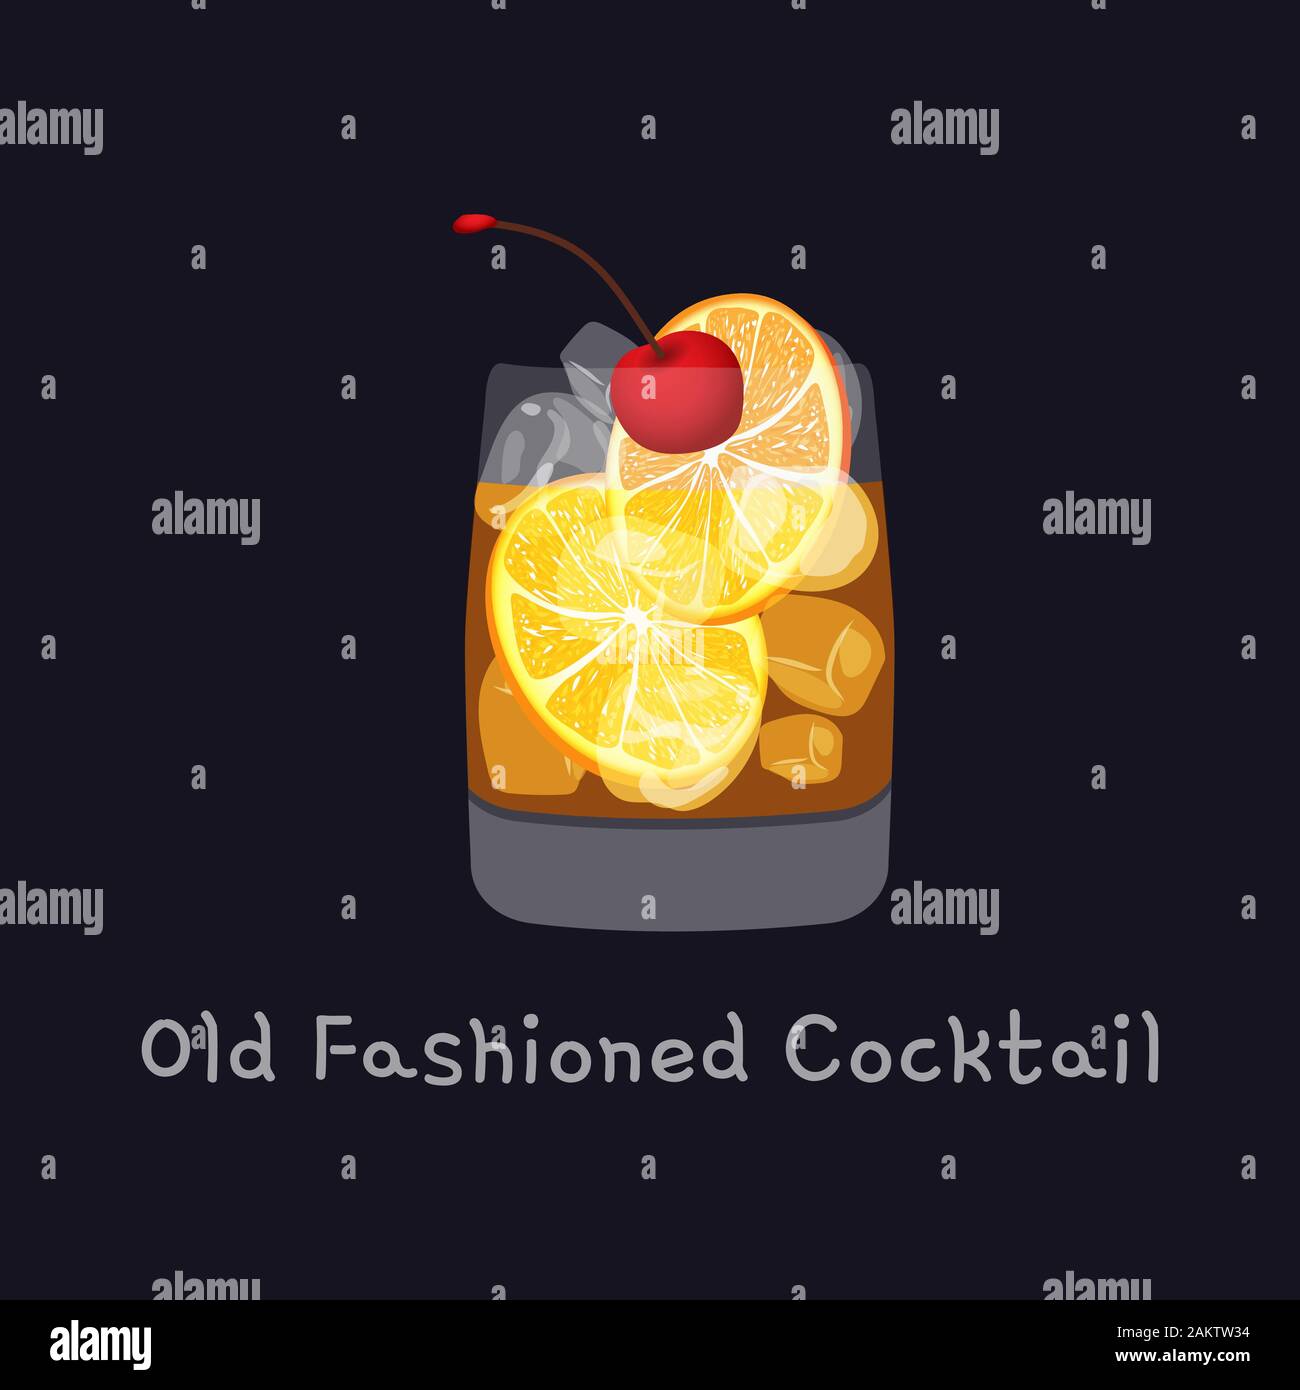 Tasty alcoholic old fashioned cocktail with orange slice, cherry, and lemon peel garnish with ice cubes, isolated on black background. Vector Stock Vector